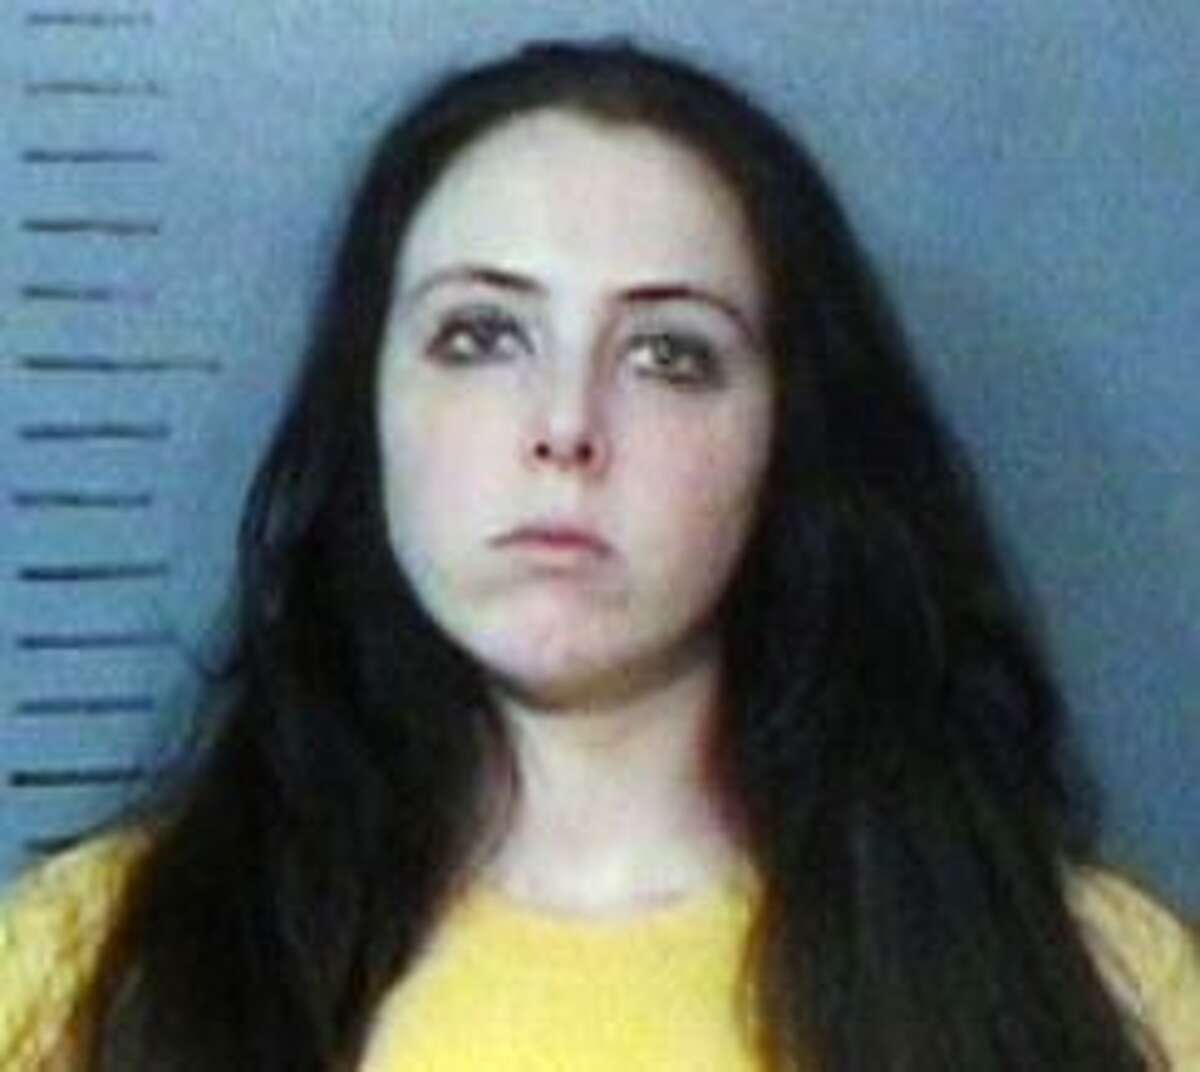 Tiffany Klapheke is jailed on three counts of child abuse.(AP Photo/Taylor County Sheriff's Office, File)